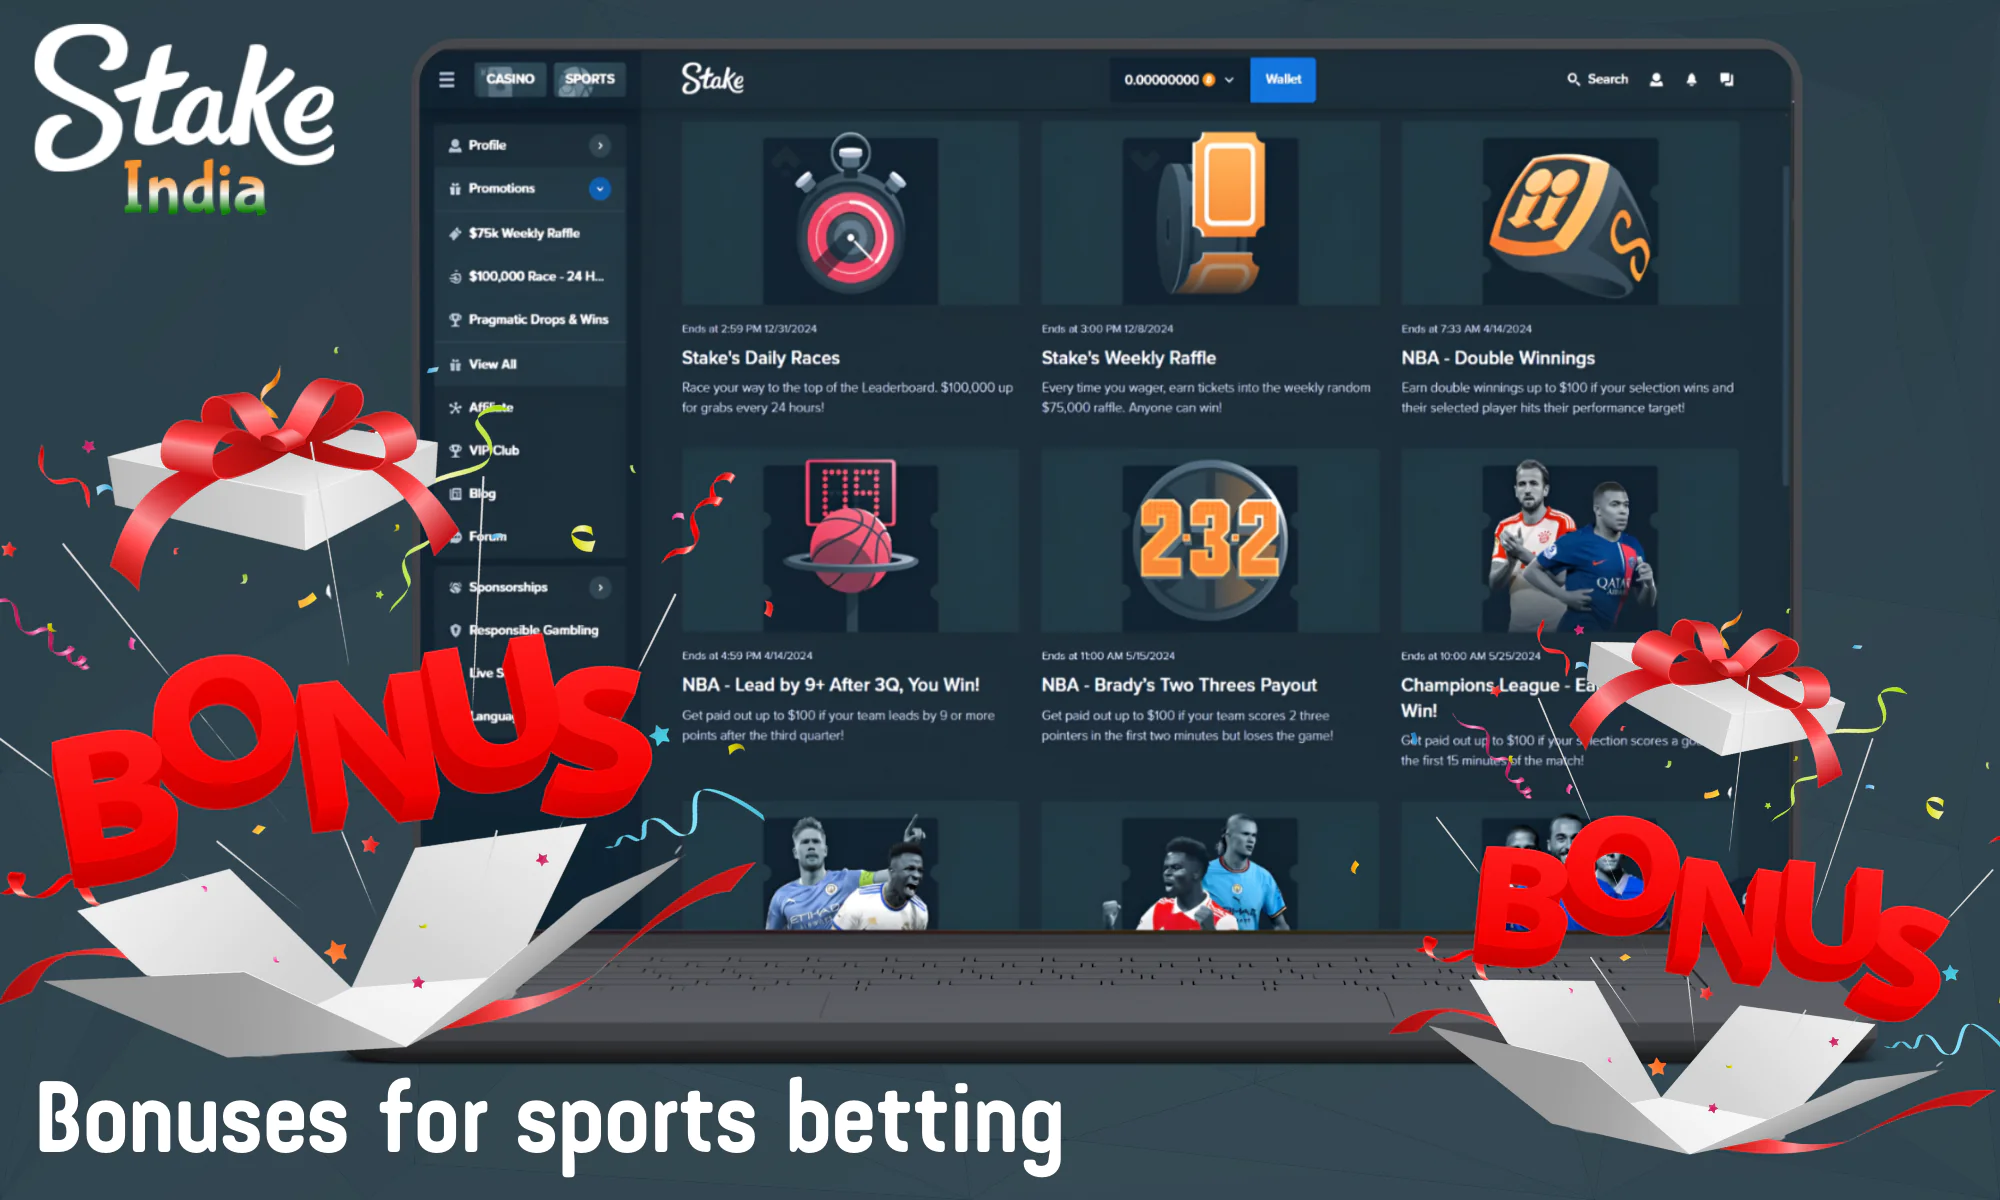 The bookmaker Stake offers a wide variety of bonuses in the Sports section